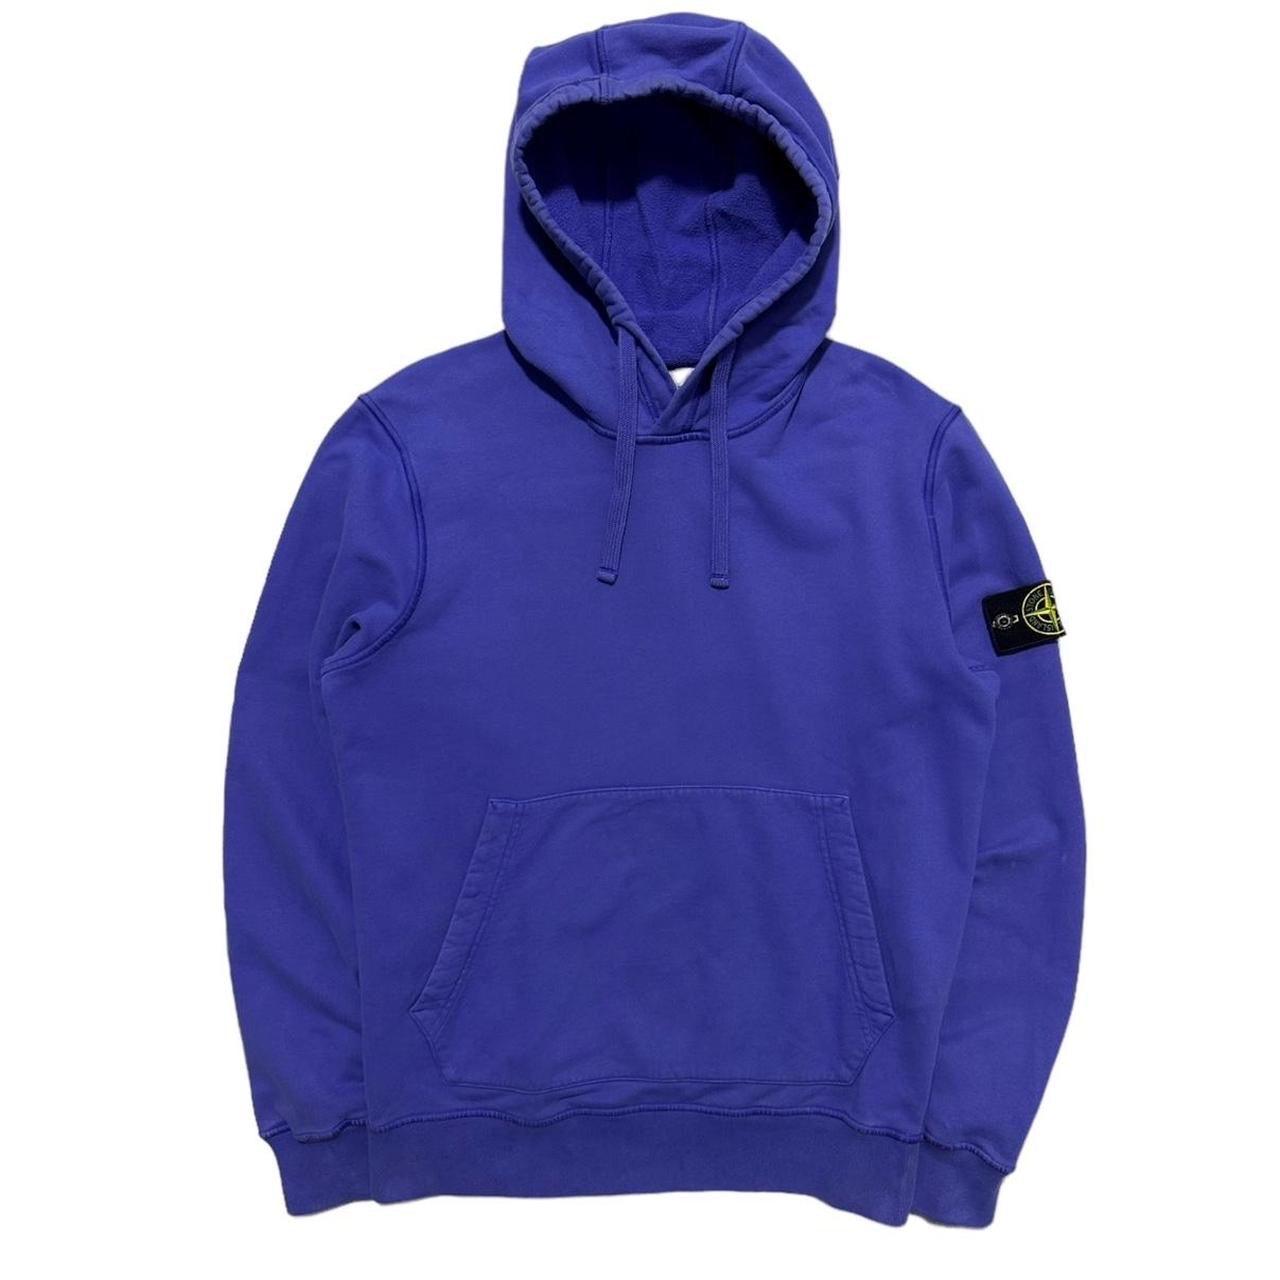 Stone Island Blue Pullover Hoodie - Known Source